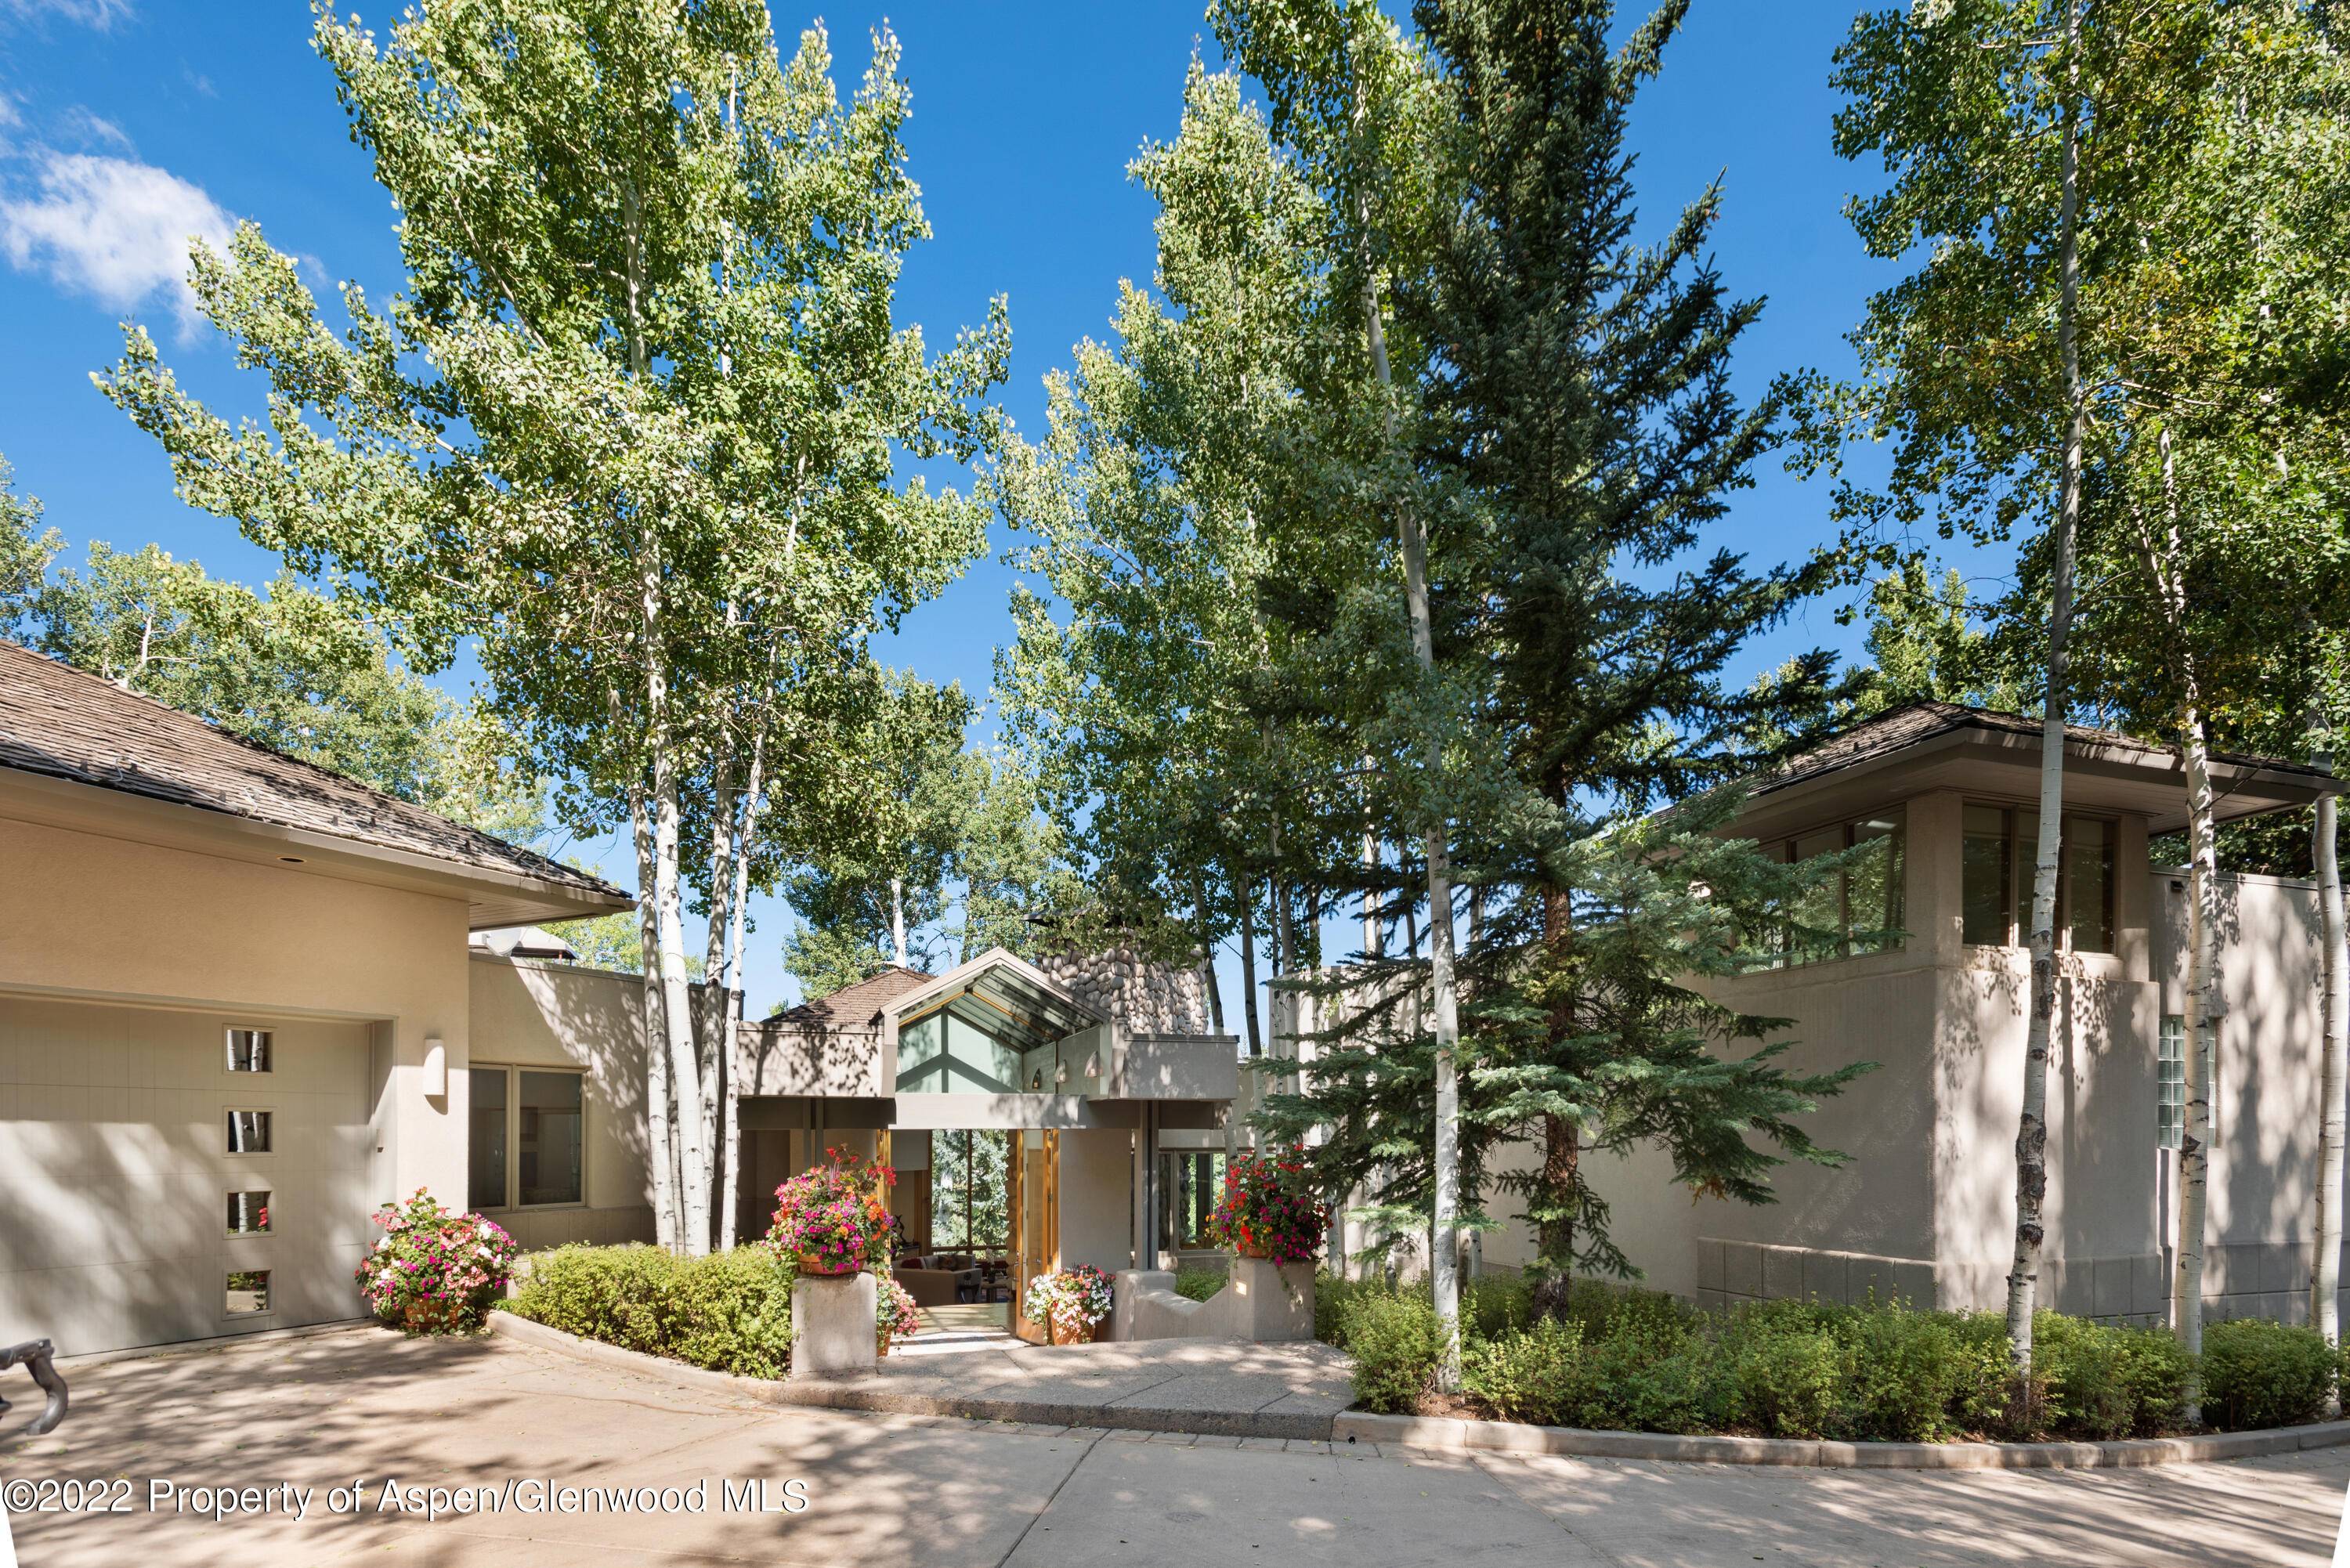 Contemporary styled home with superb views, privacy and ski in ski out located in Two Creeks subdivision in Snowmass Village.